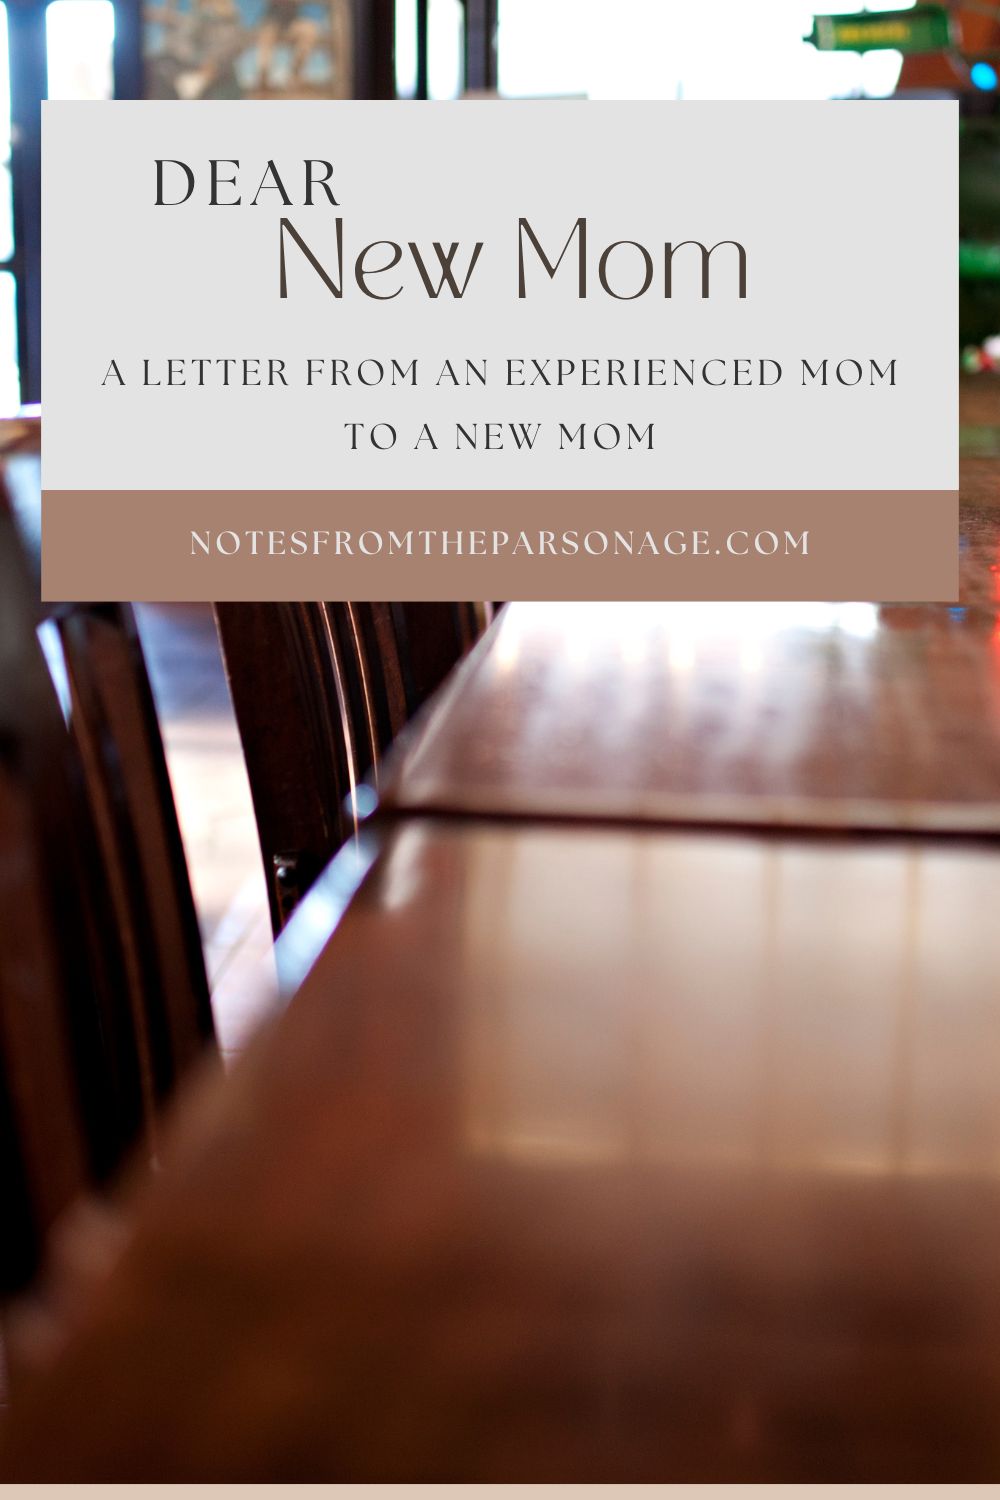 Dear New Mom graphic image for pinning to Pinterest